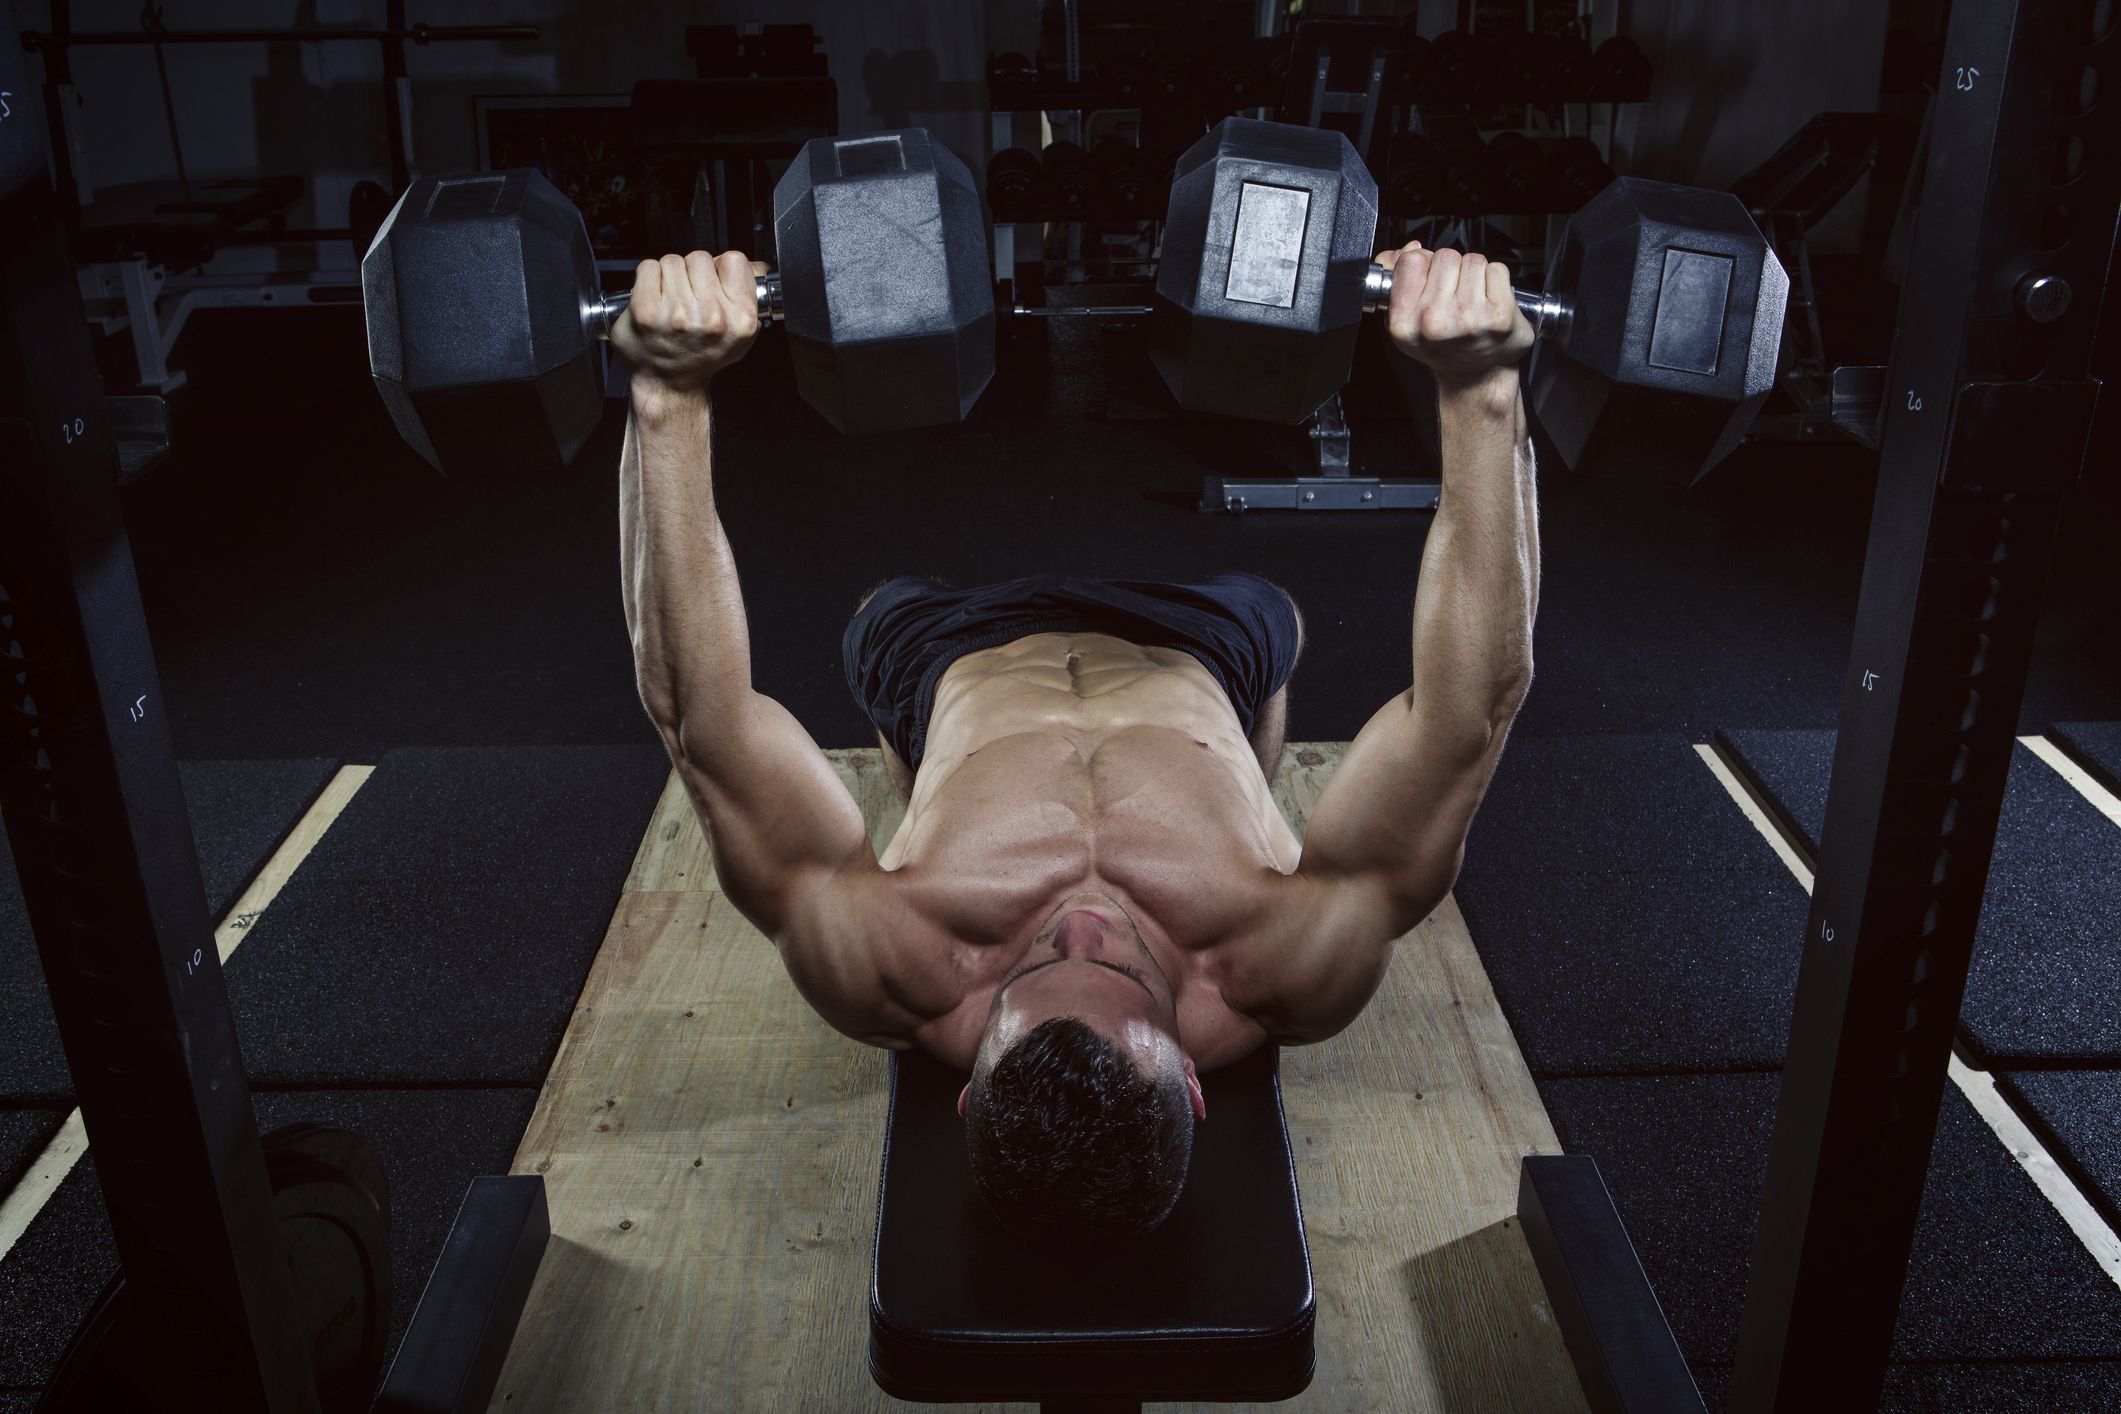 8 Best Dumbbell Chest Exercises To Pump Up Your Pecs